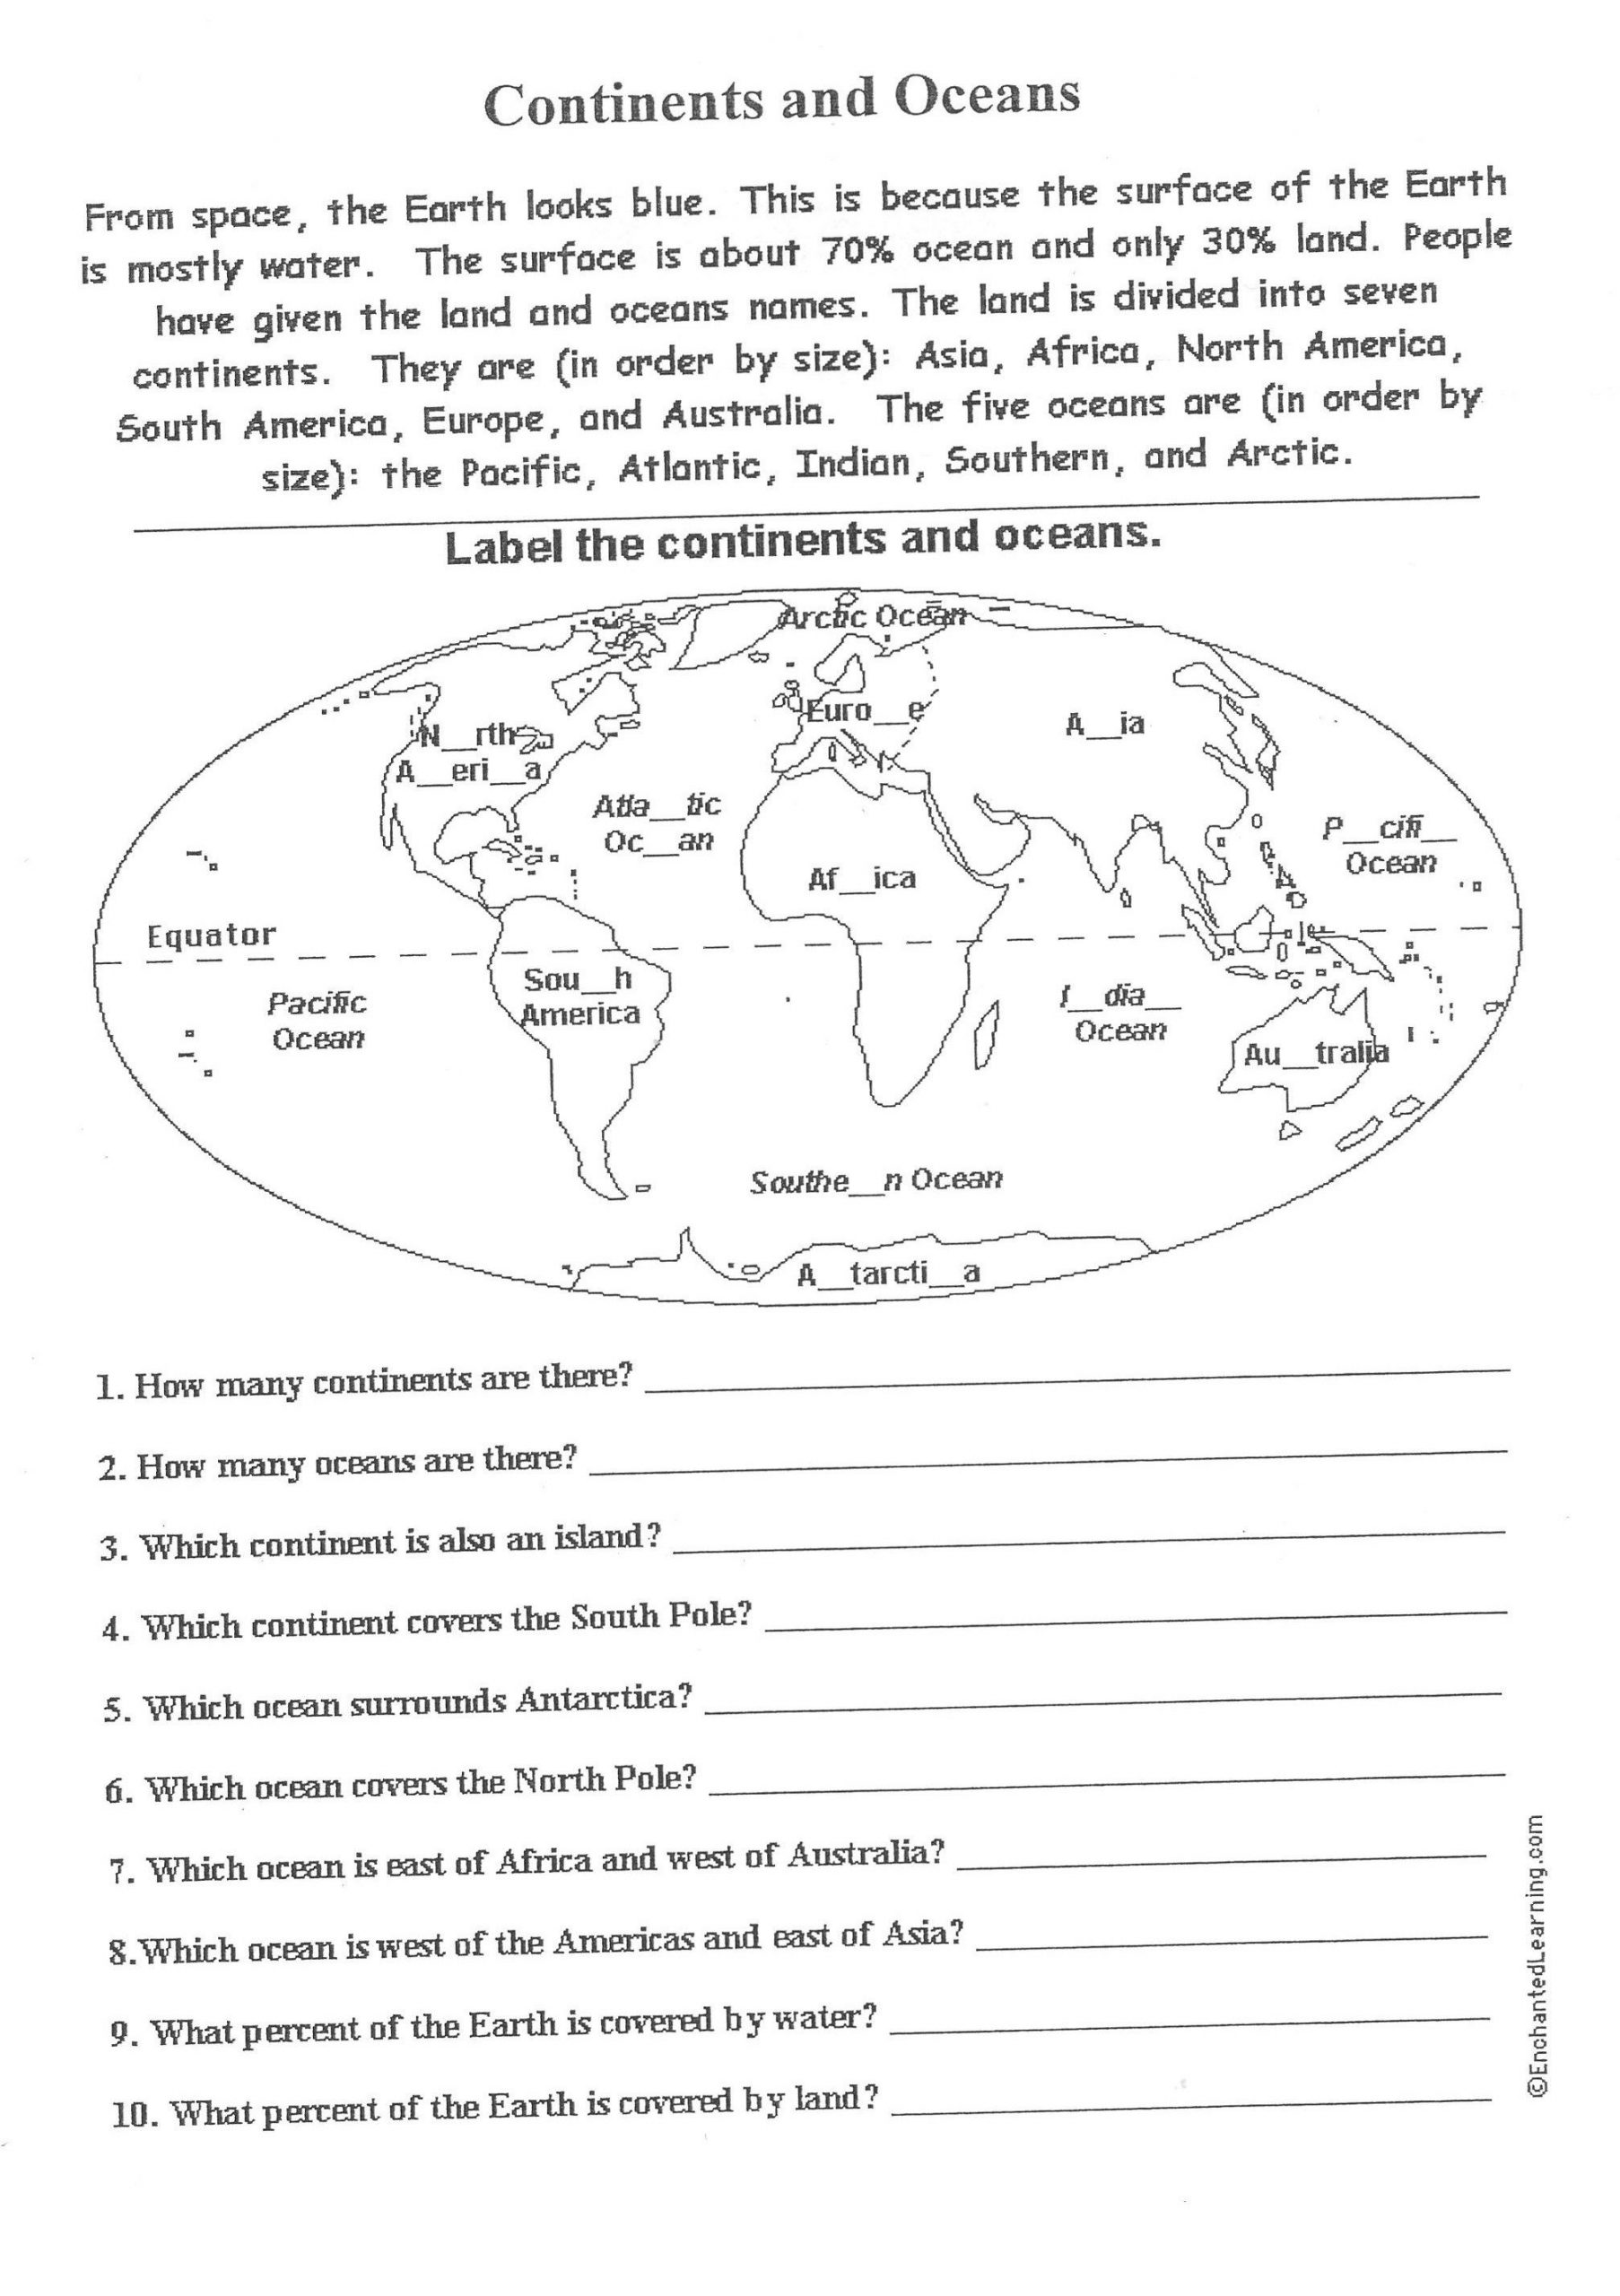 Continents and Oceans Worksheet 3rd Grade social Stu S Worksheets Continents